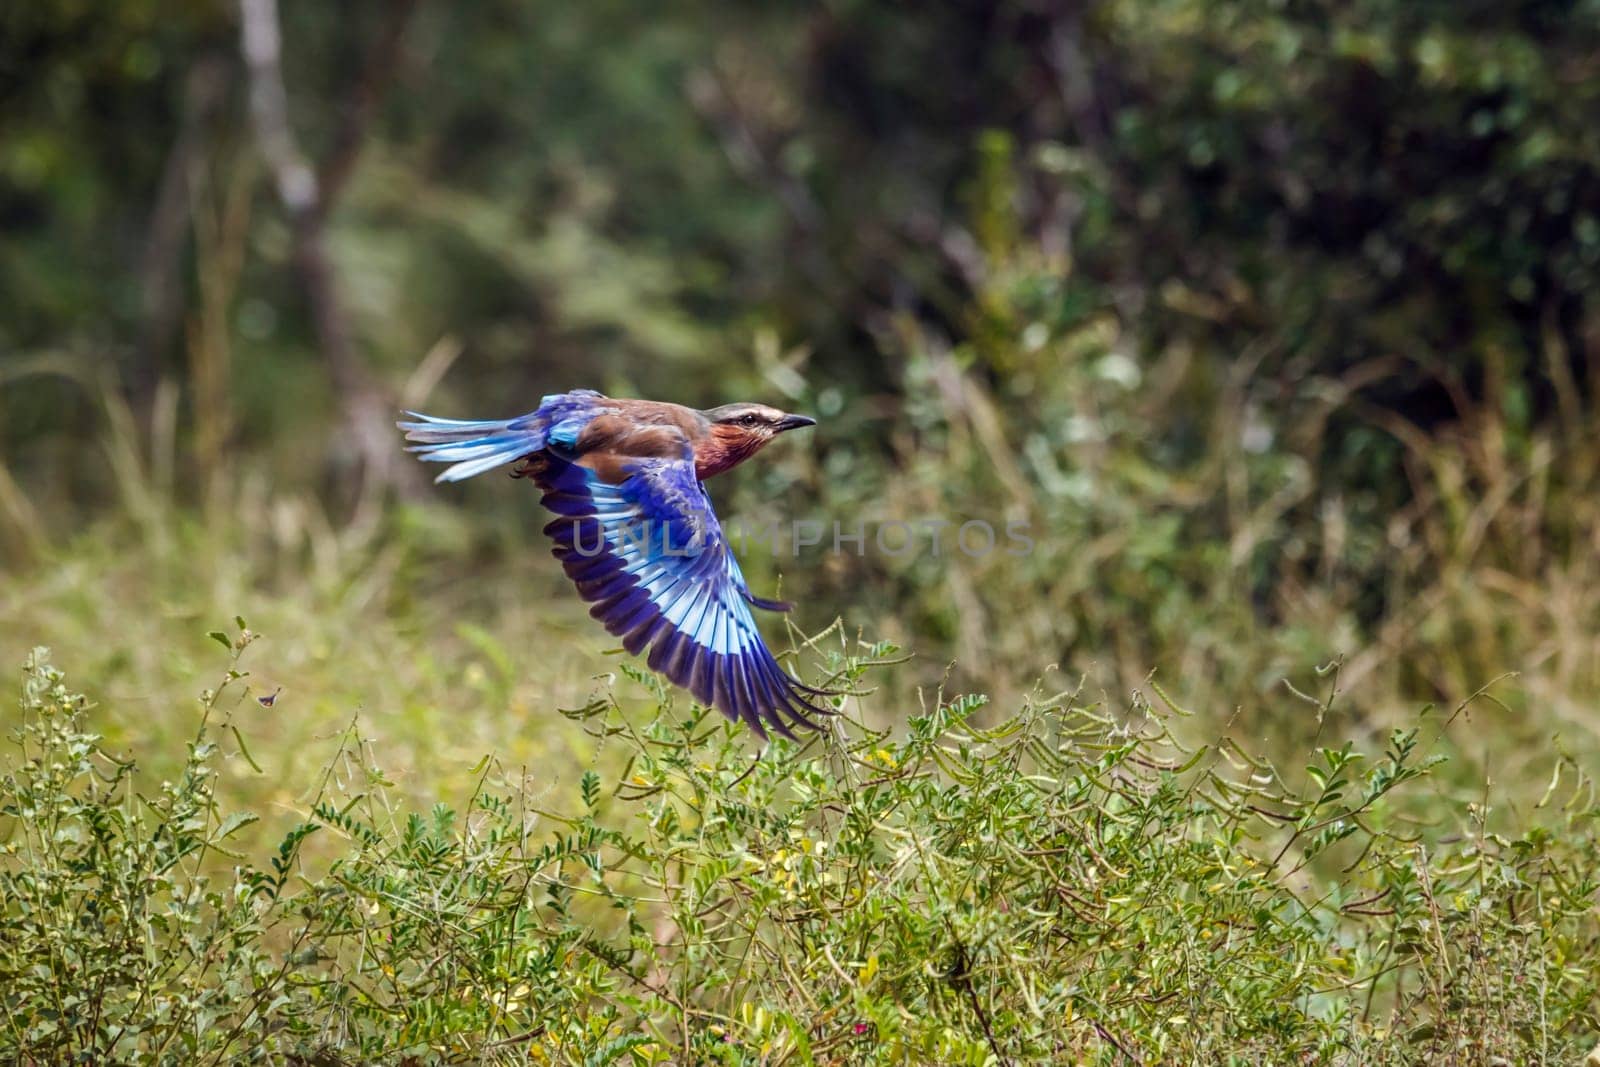 Lilac breasted roller in flight in Kruger National park, South Africa ; Specie Coracias caudatus family of Coraciidae